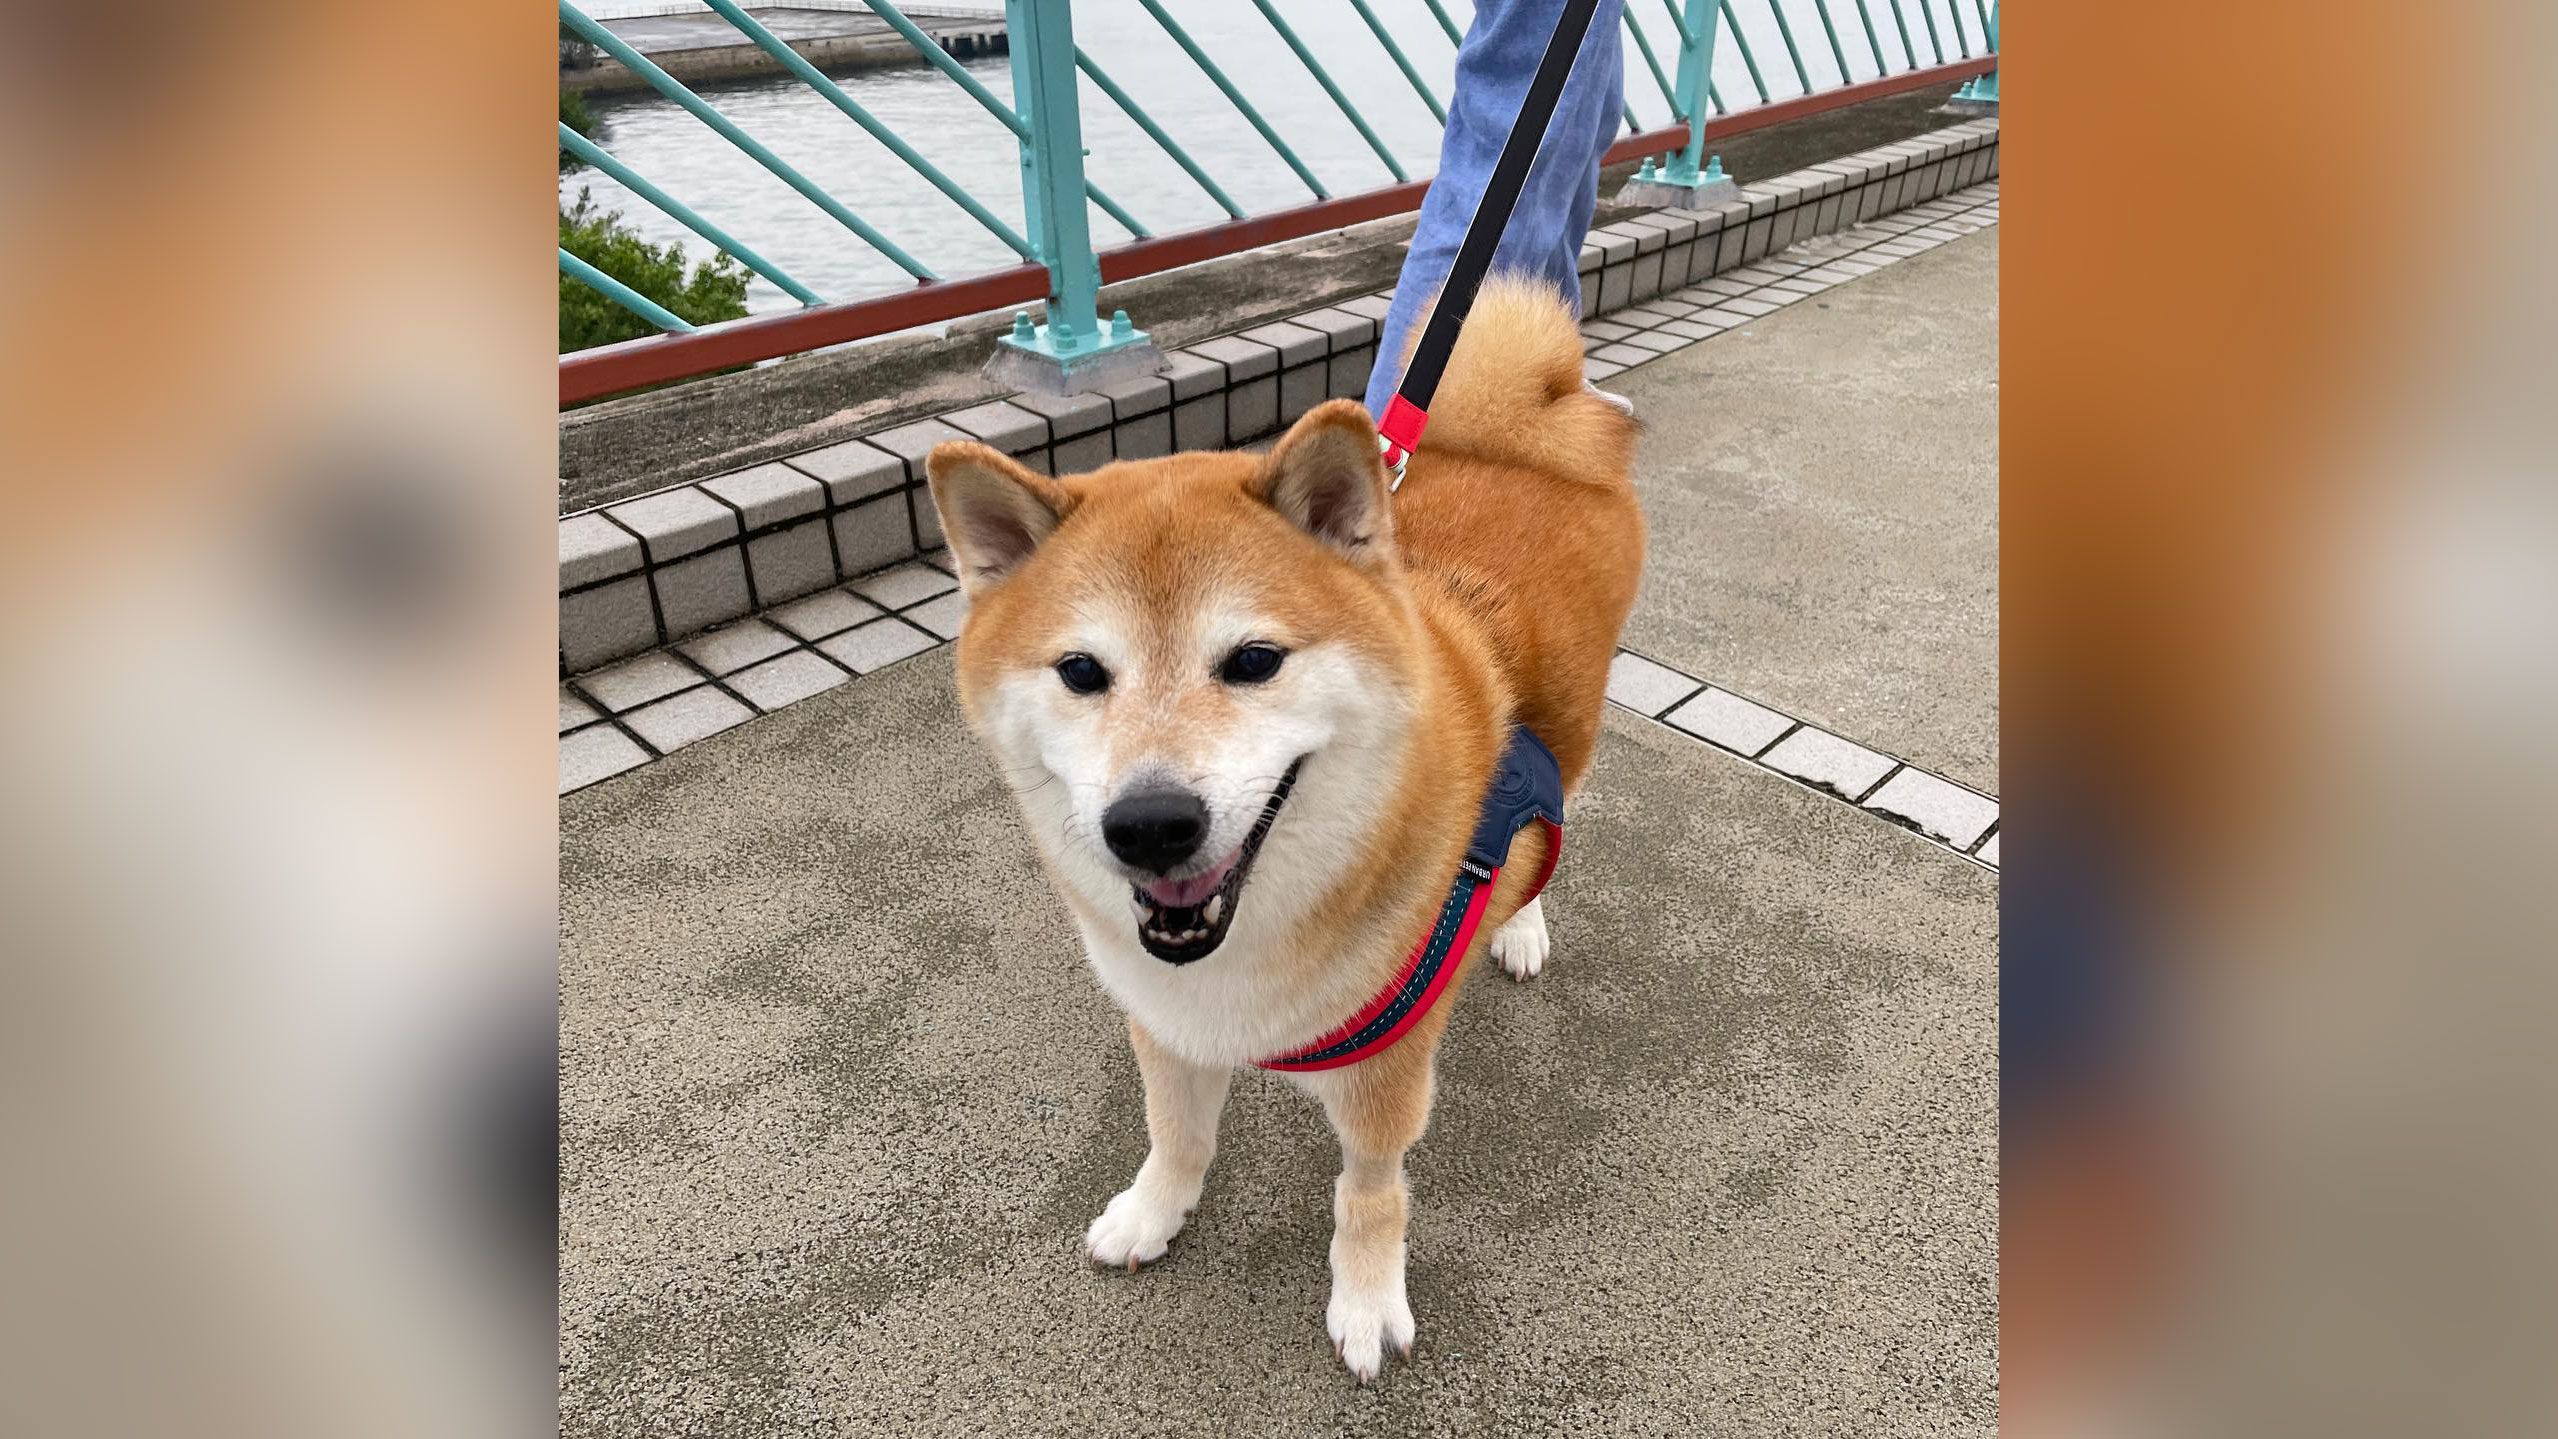 Dogecoin (DOGE) Price Wildly Swings as Fake Rumor of Mascot's Death Riles Up Crypto Observers